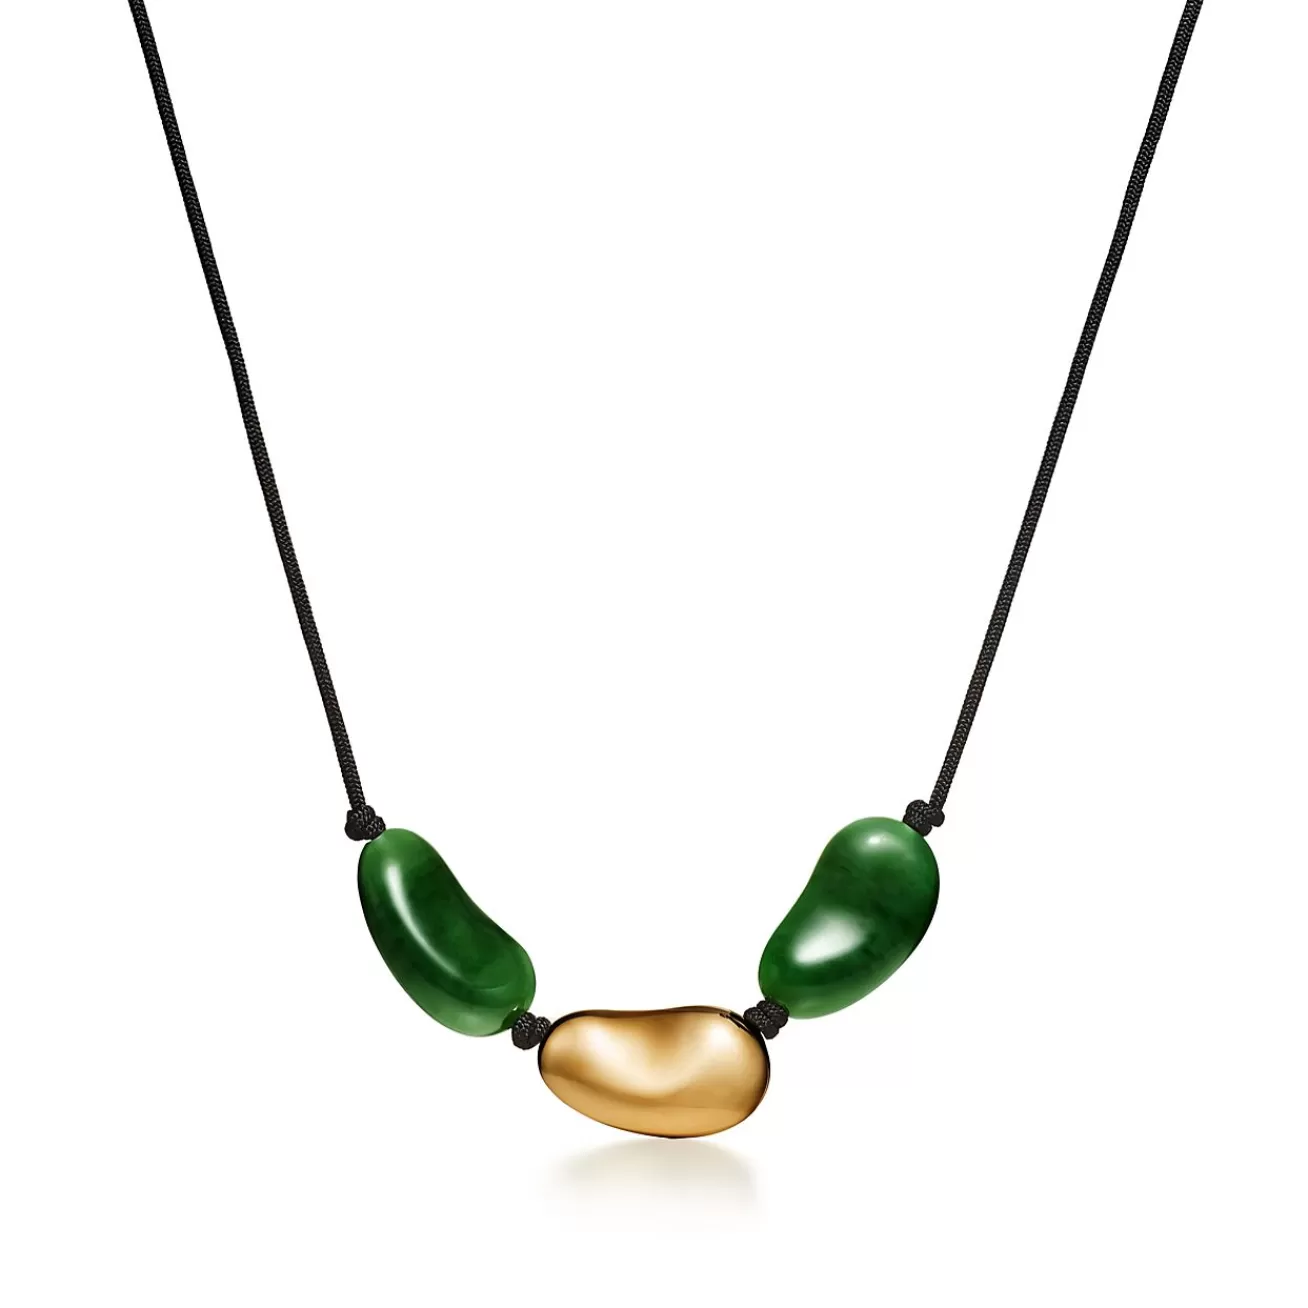 Tiffany & Co. Elsa Peretti® Bean® design Necklace in Yellow Gold with Green Jade, 29 x 50 mm | ^ Necklaces & Pendants | Gold Jewelry